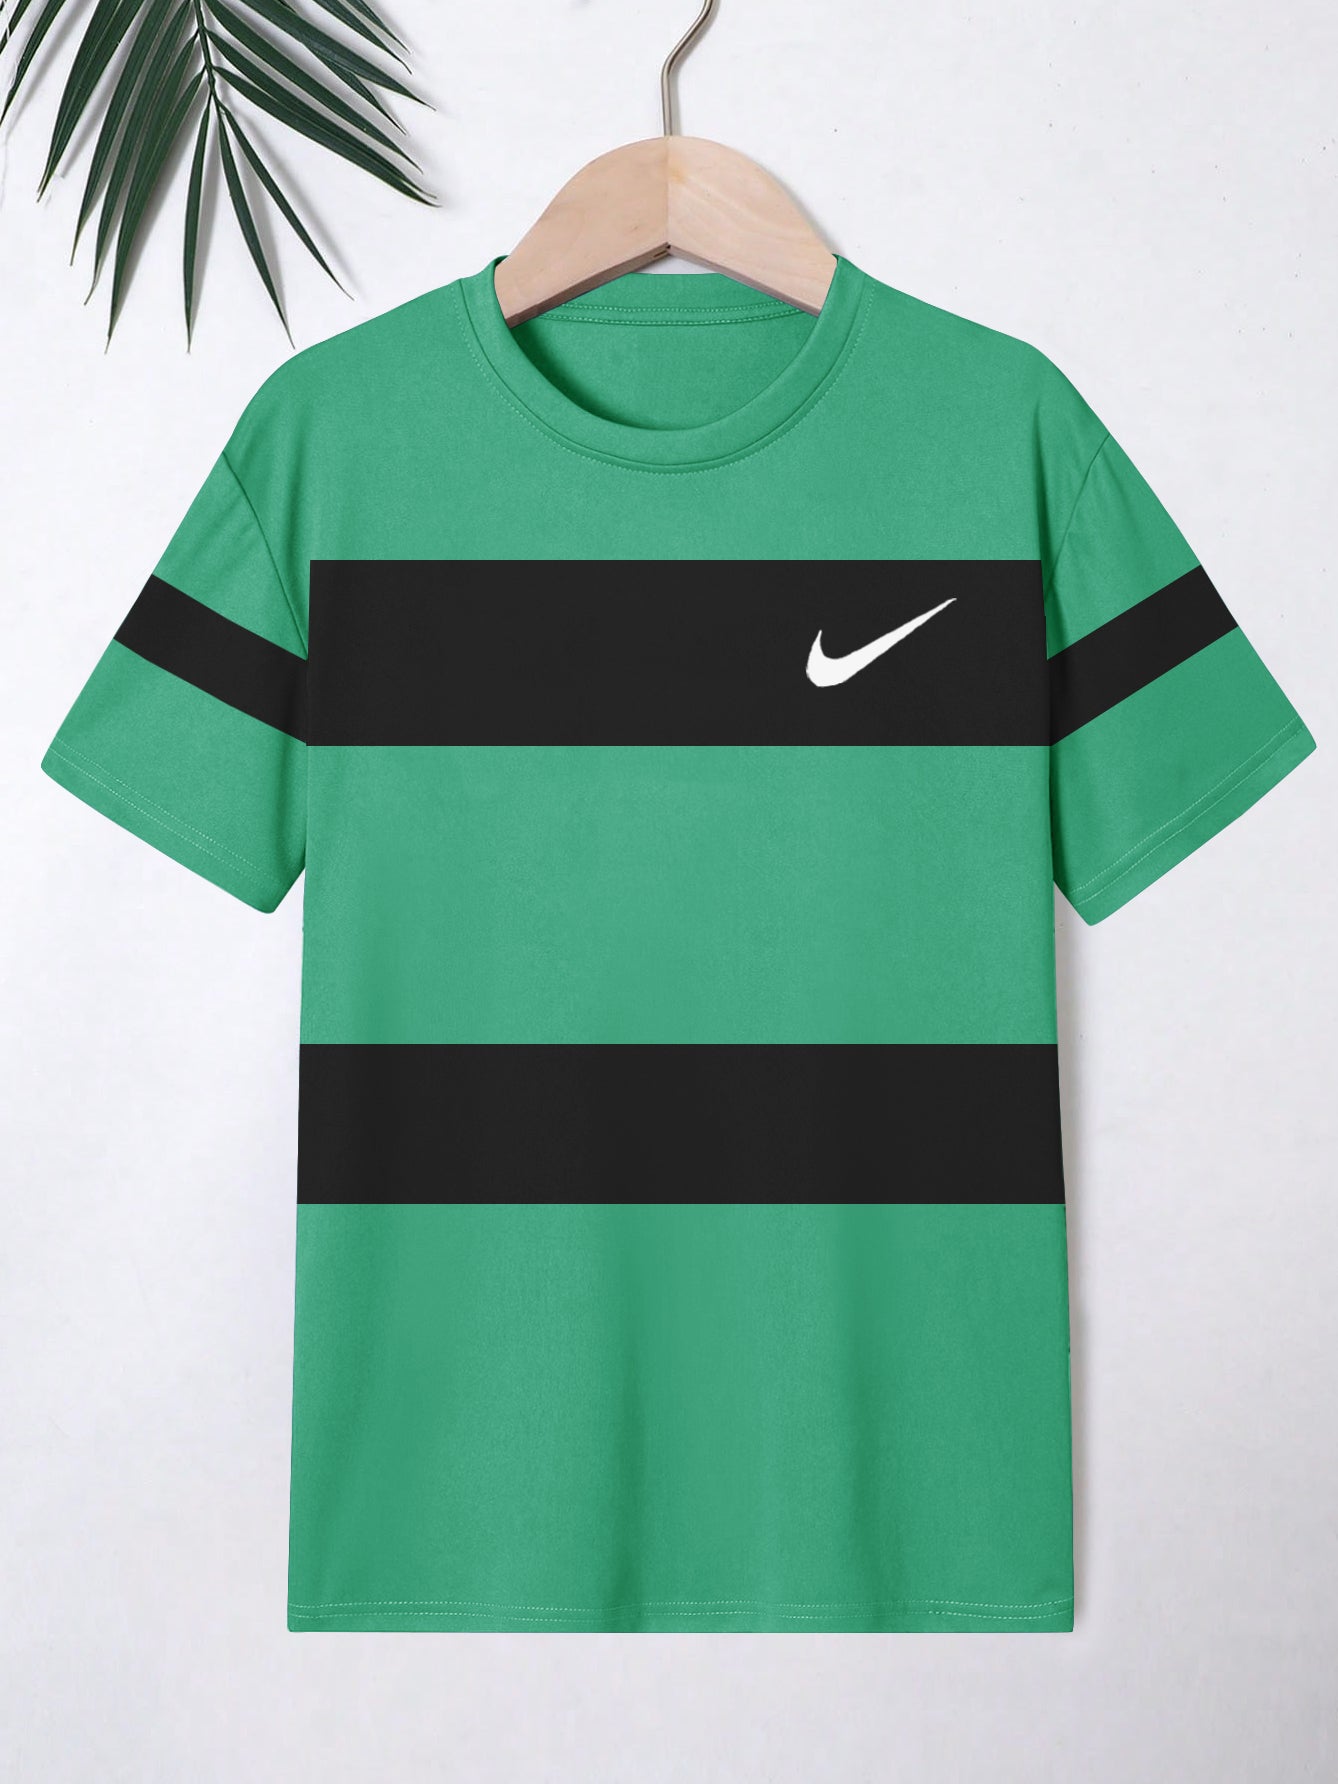 NK Crew Neck Single Jersey Tee Shirt For Kids-Green with Black Panels-SP2281